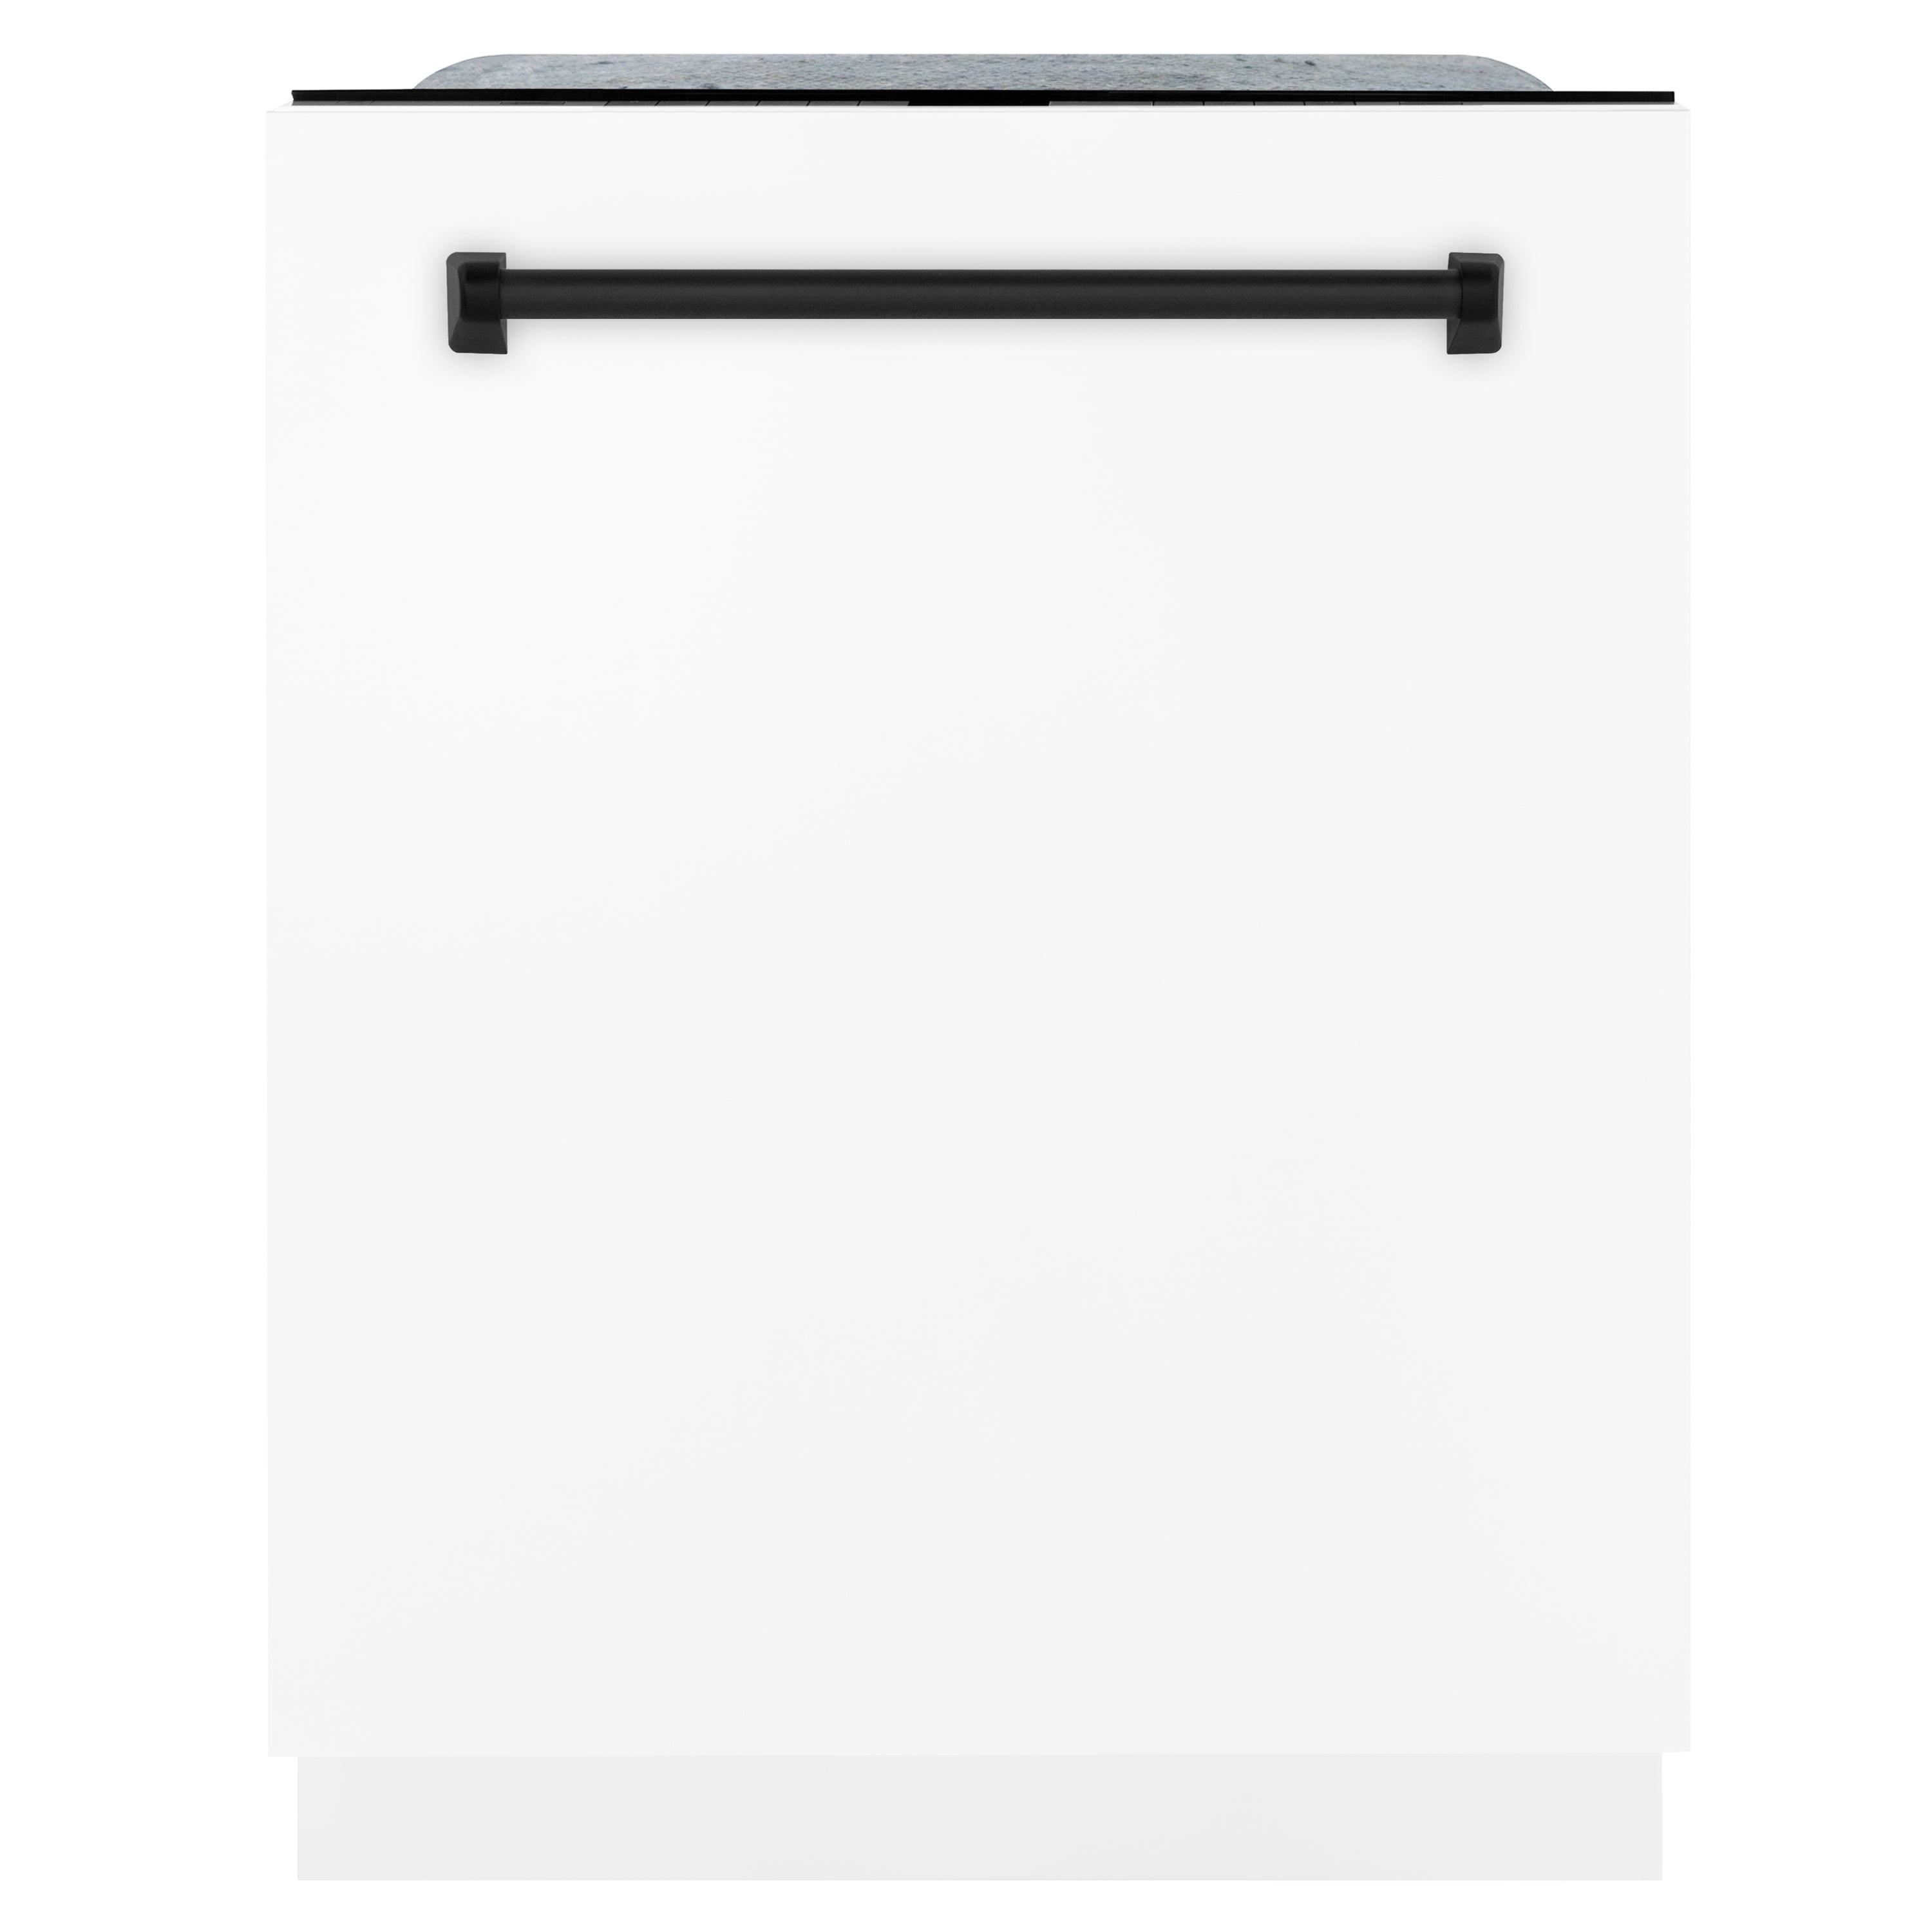 ZLINE Autograph Edition 24 inch Tall Dishwasher, Touch Control, in White Matte with Matte Black Handle